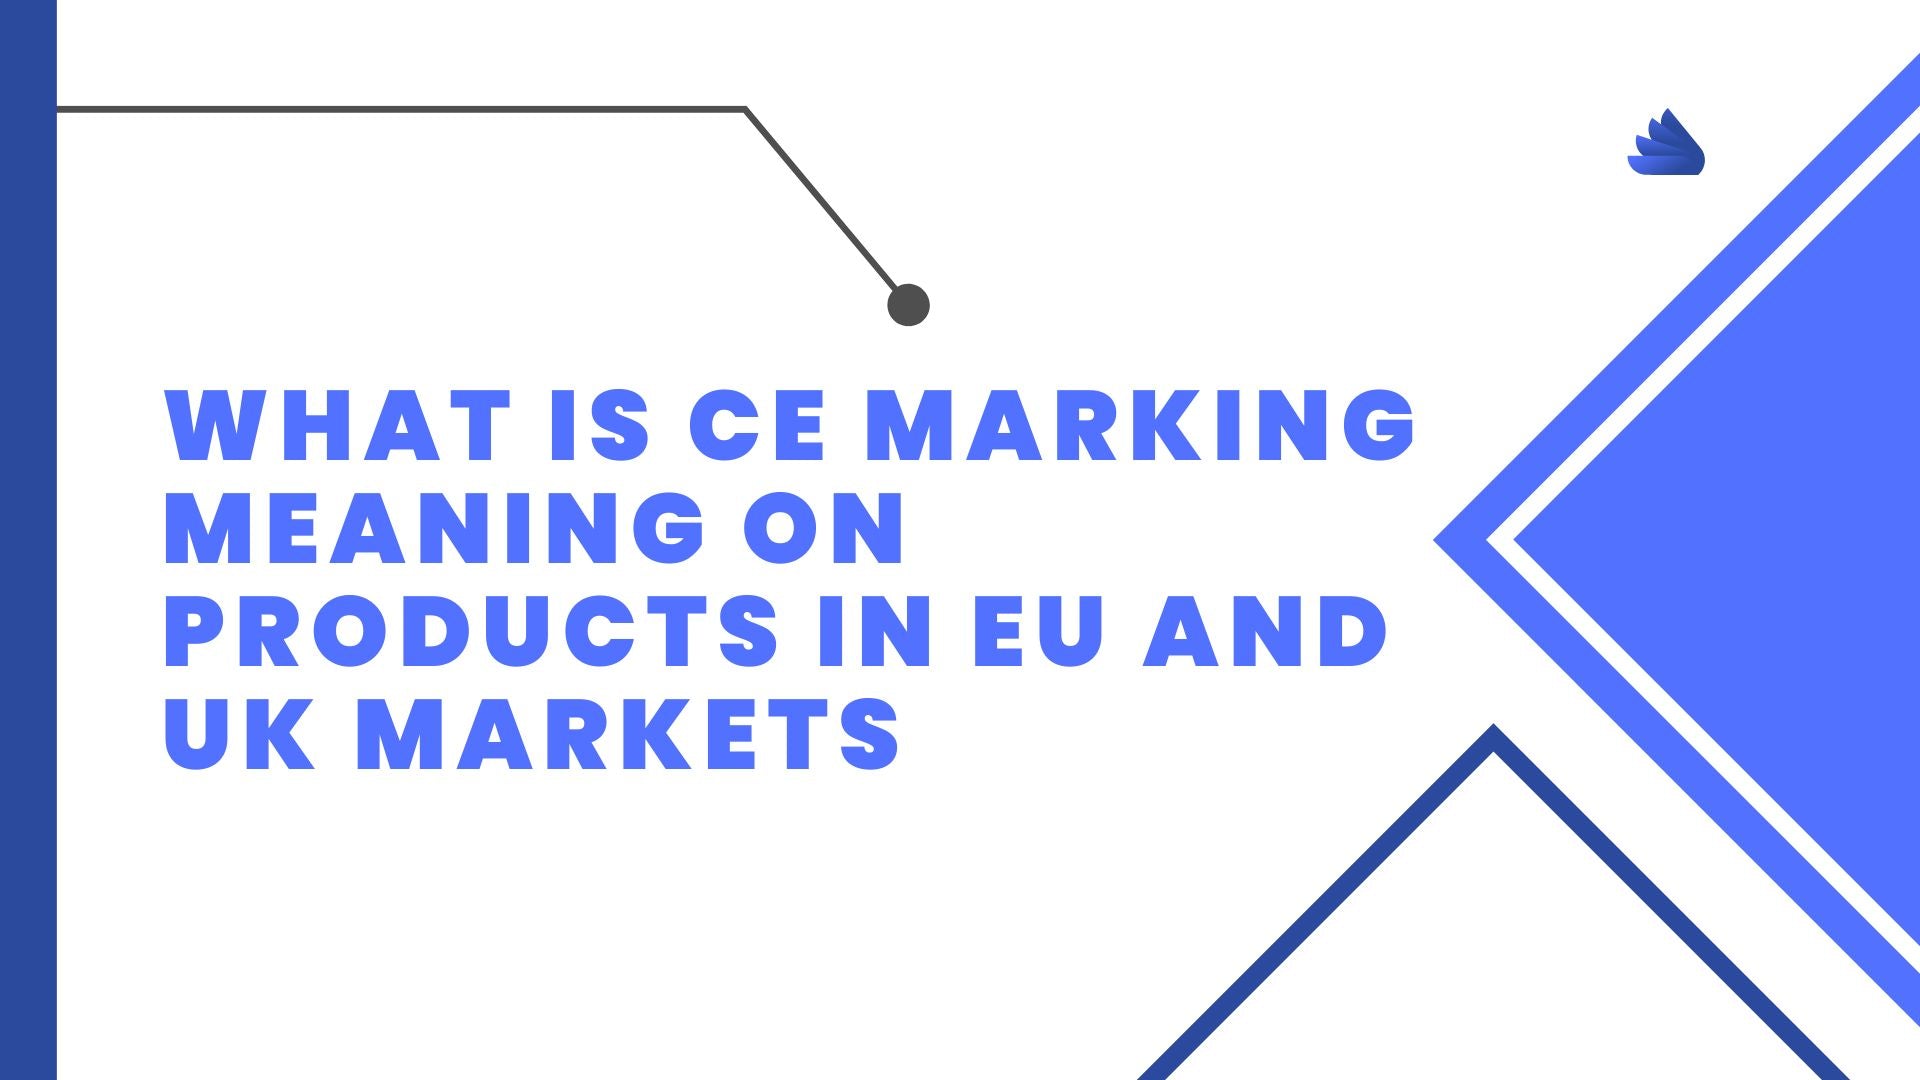 What is CE Marking Meaning on Products in EU and UK Markets？